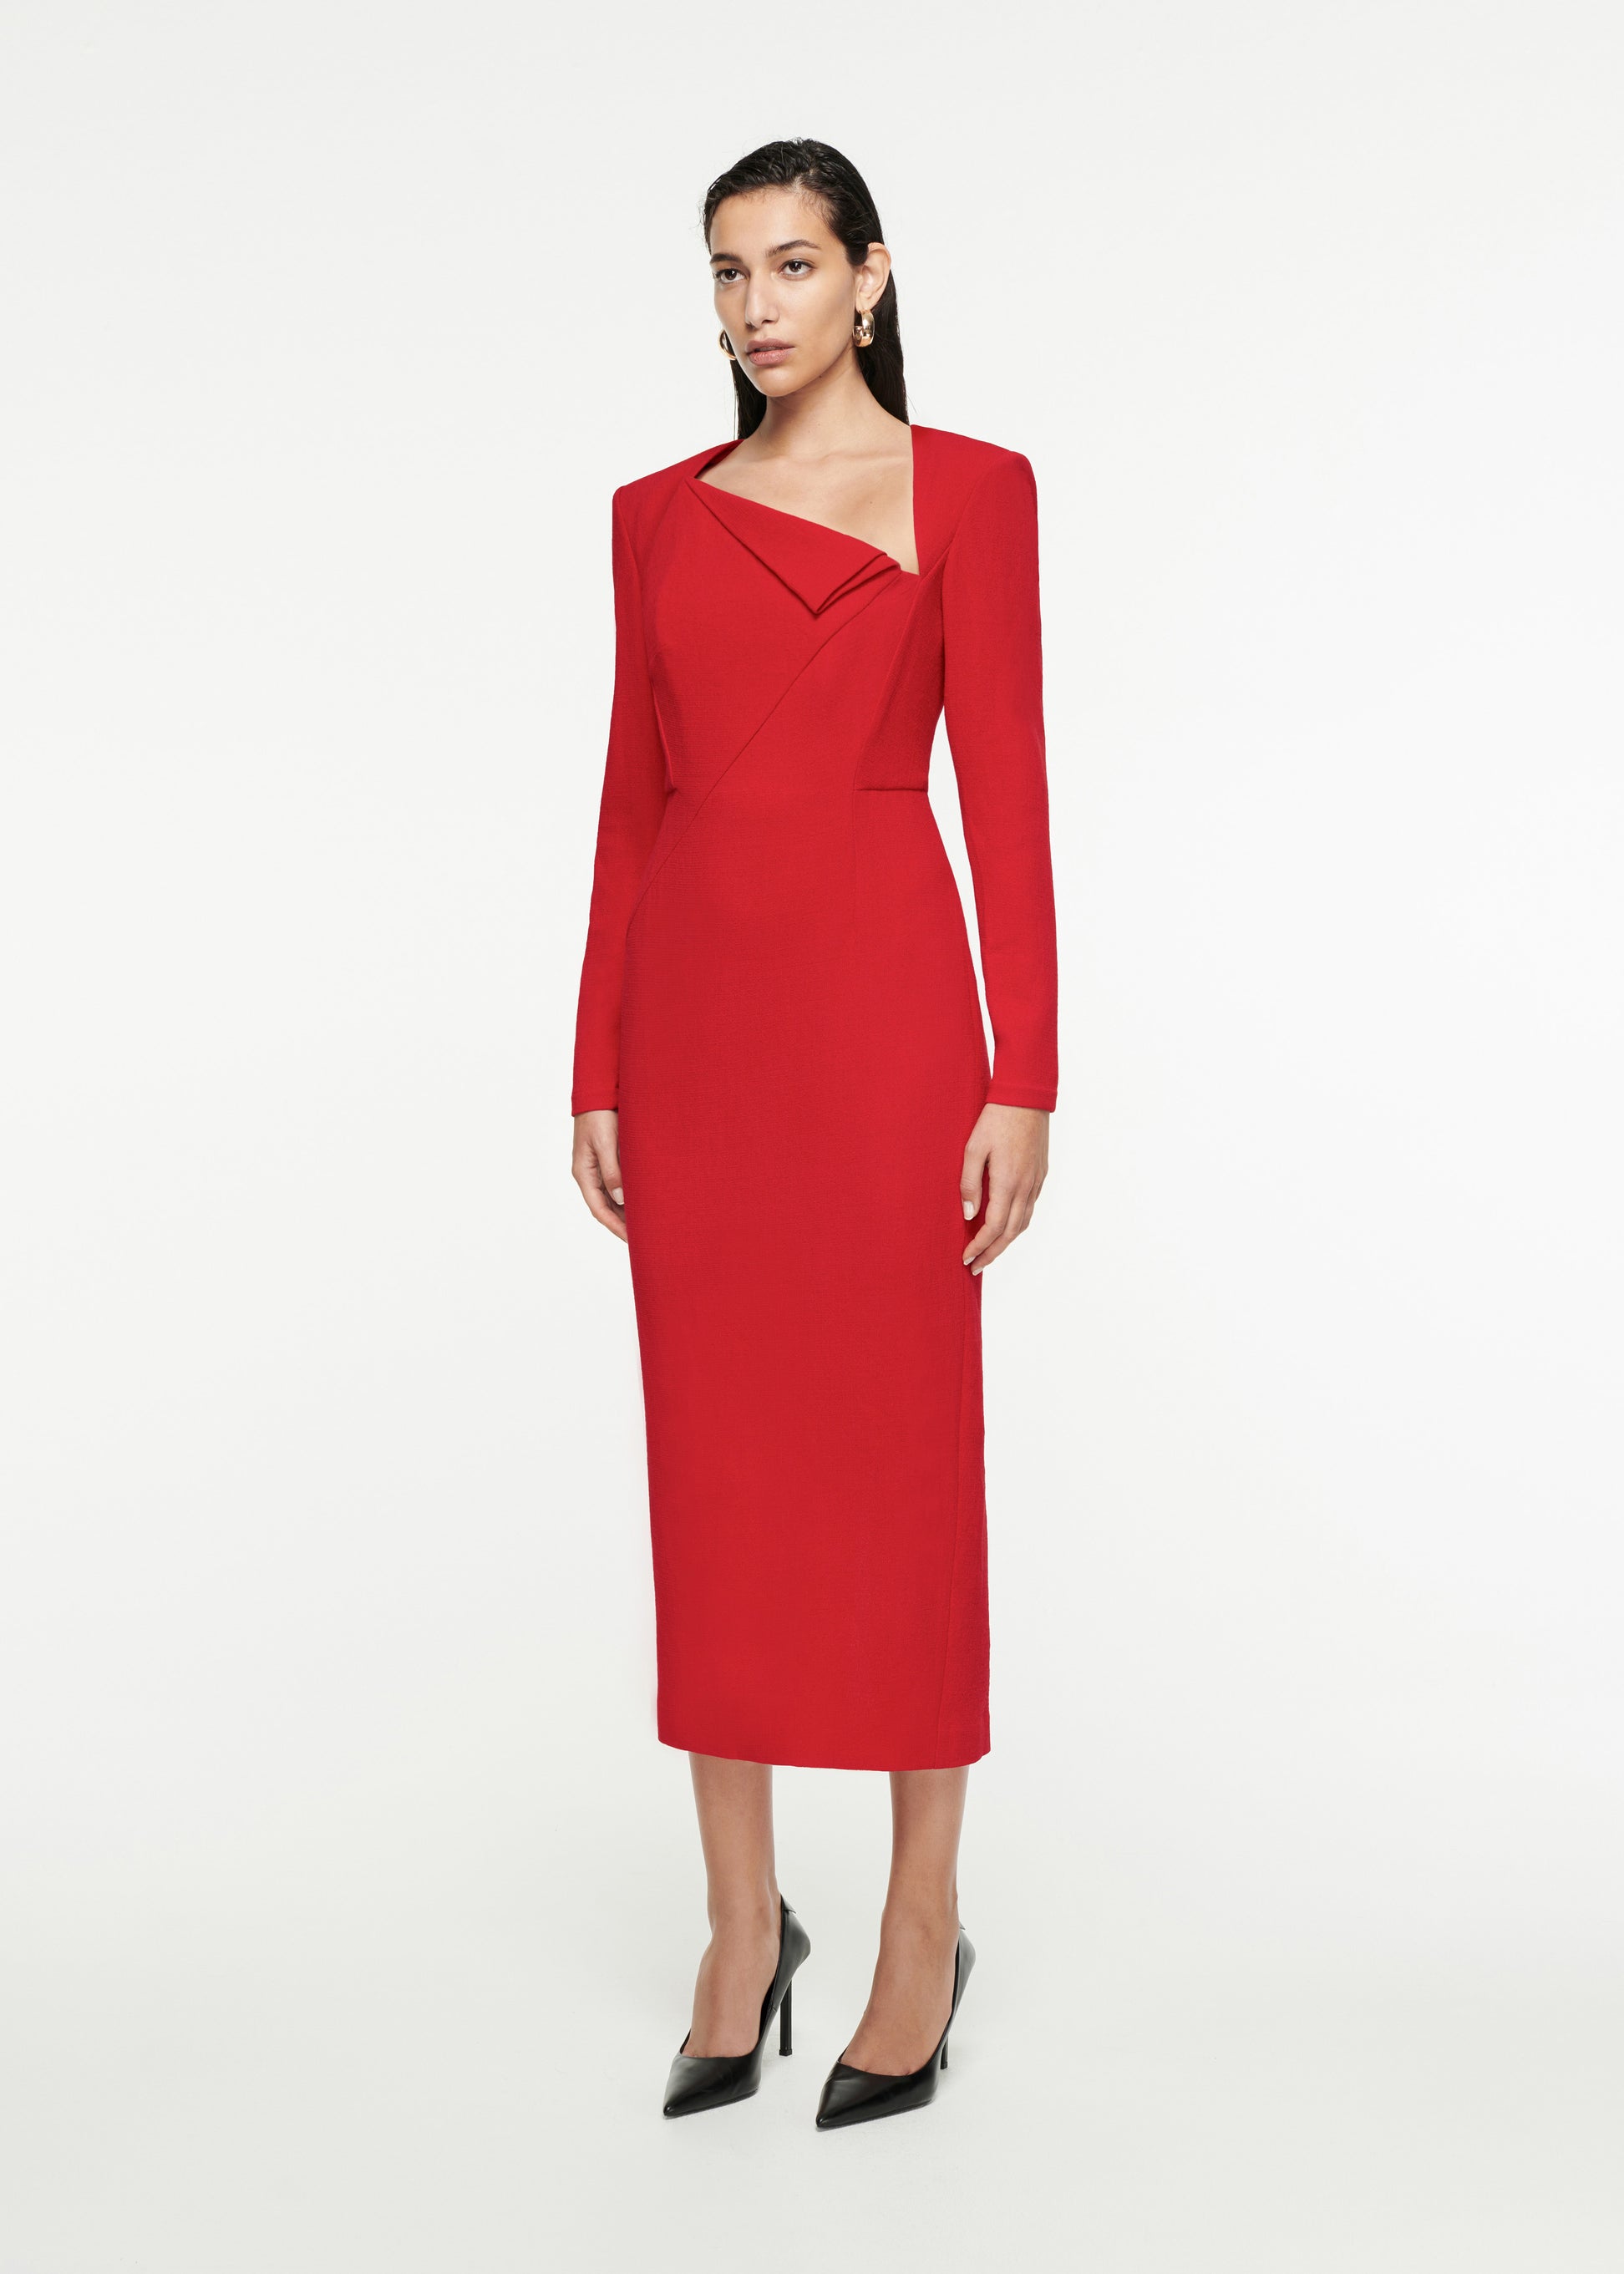 Woman wearing the Long Sleeve Origami Midi Dress in Red